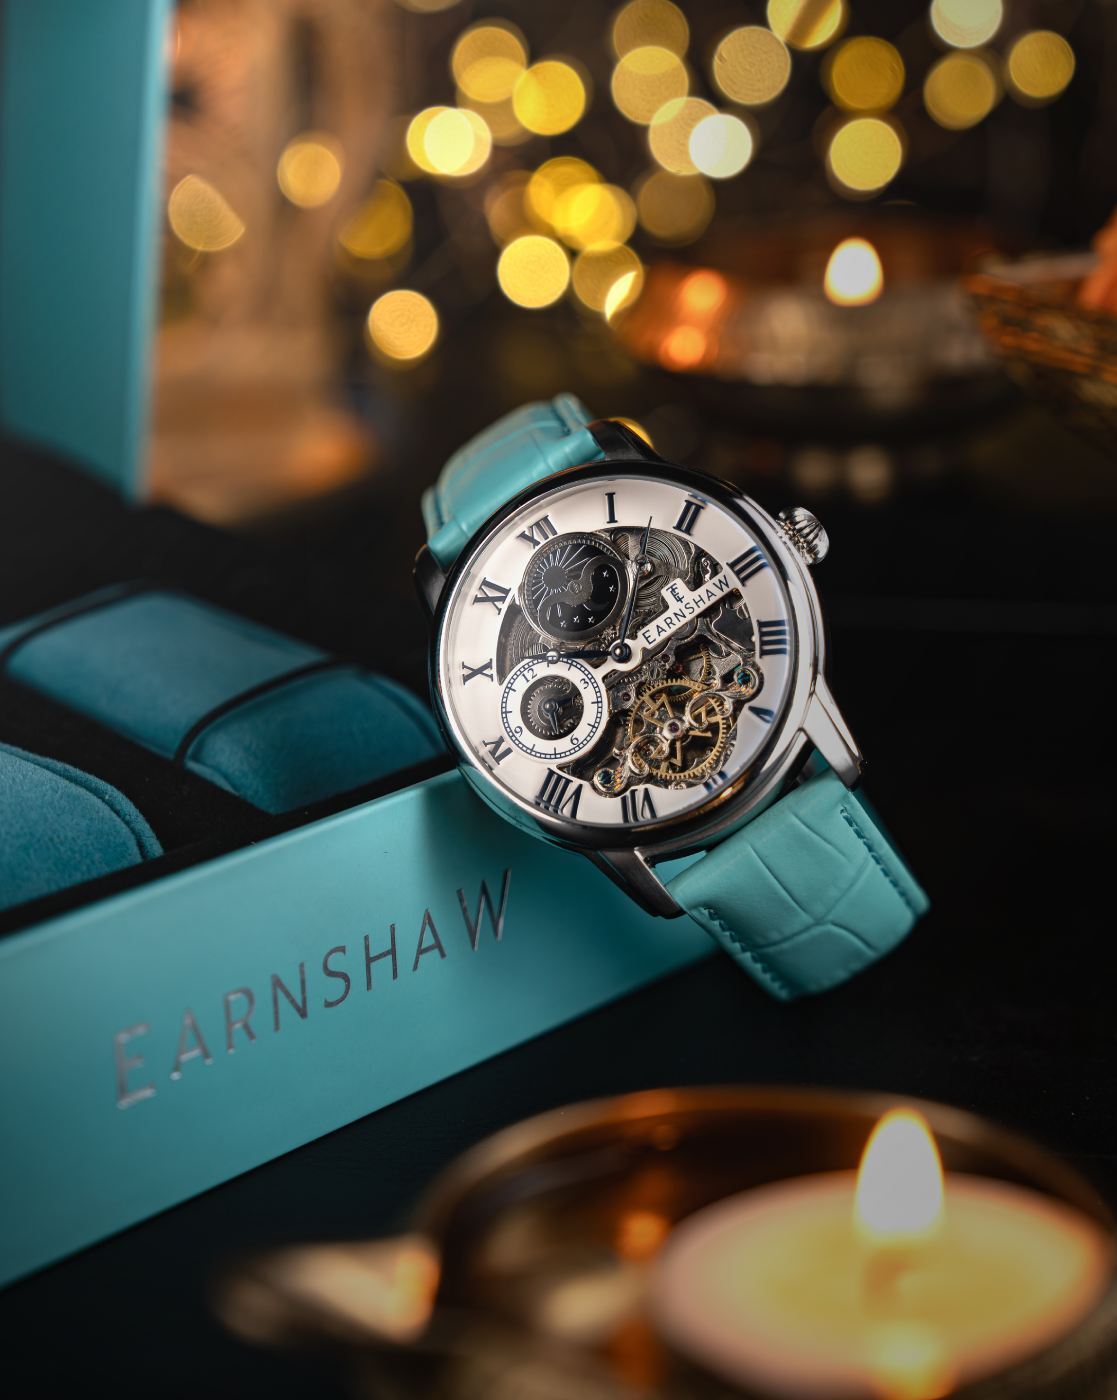 Buy Silver Watches for Men by Earnshaw Online | Ajio.com